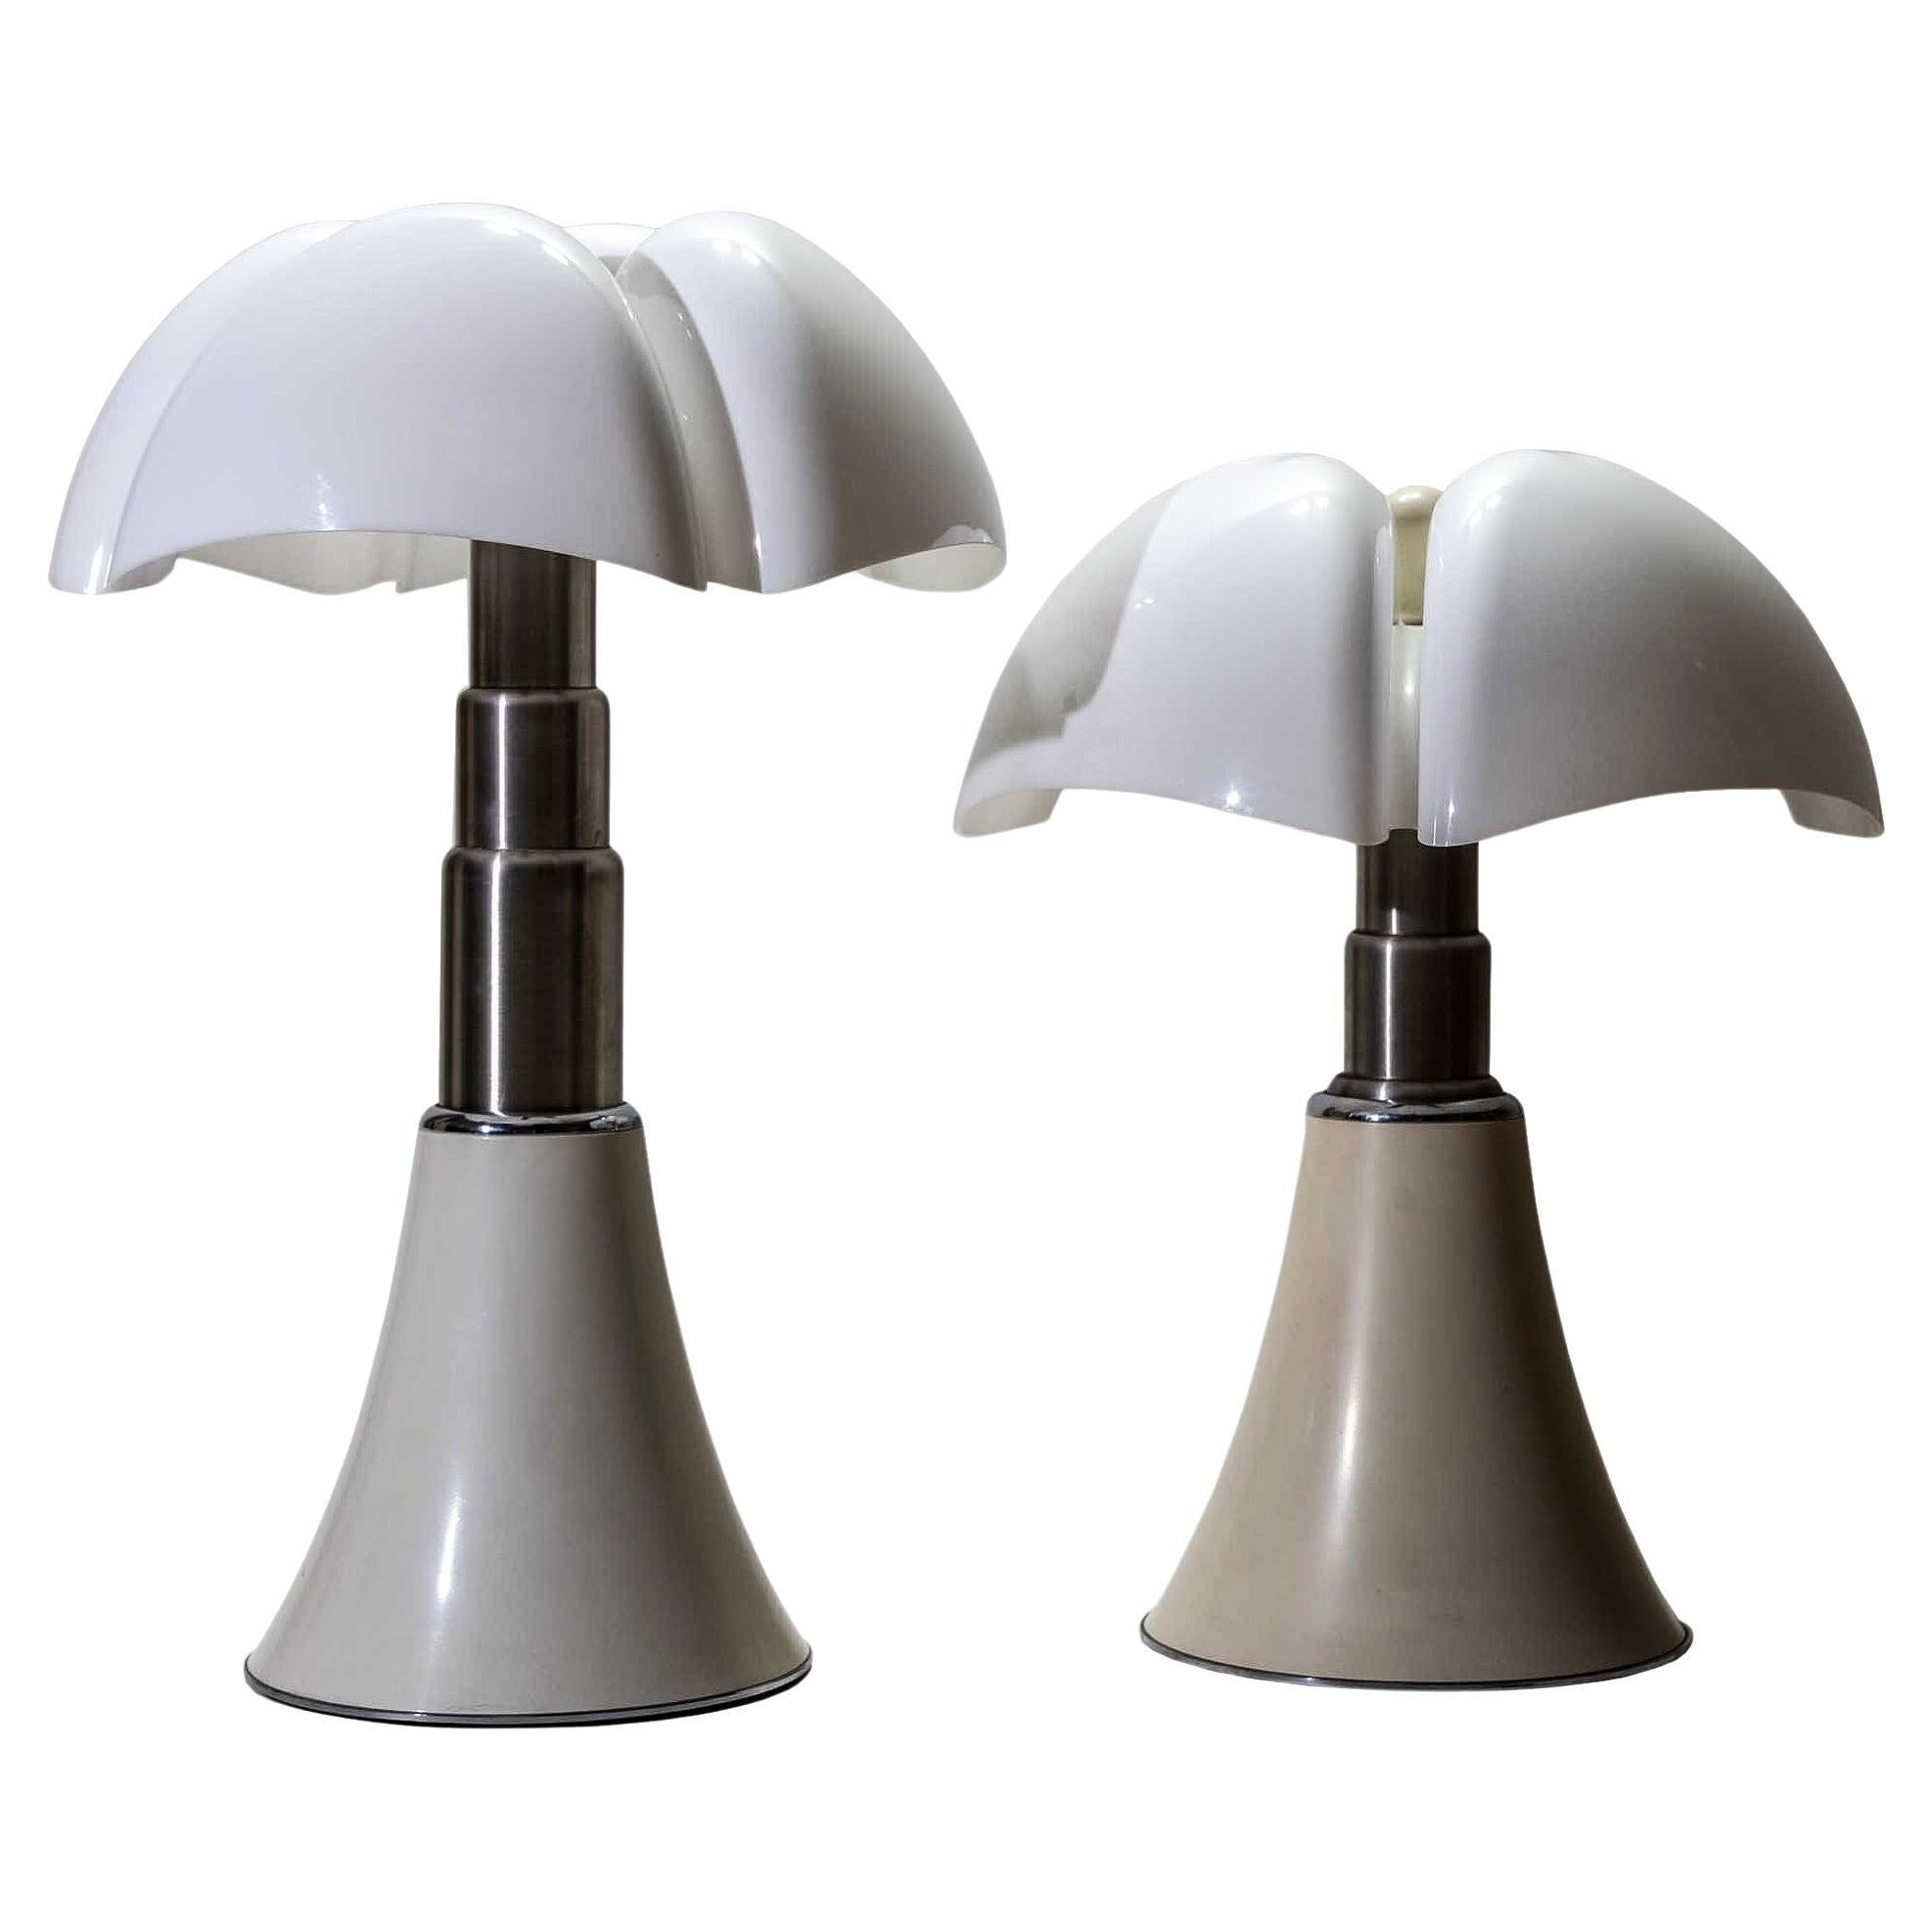 Pair of "Pipistrello" Table Lamps by Gae Aulenti For Sale